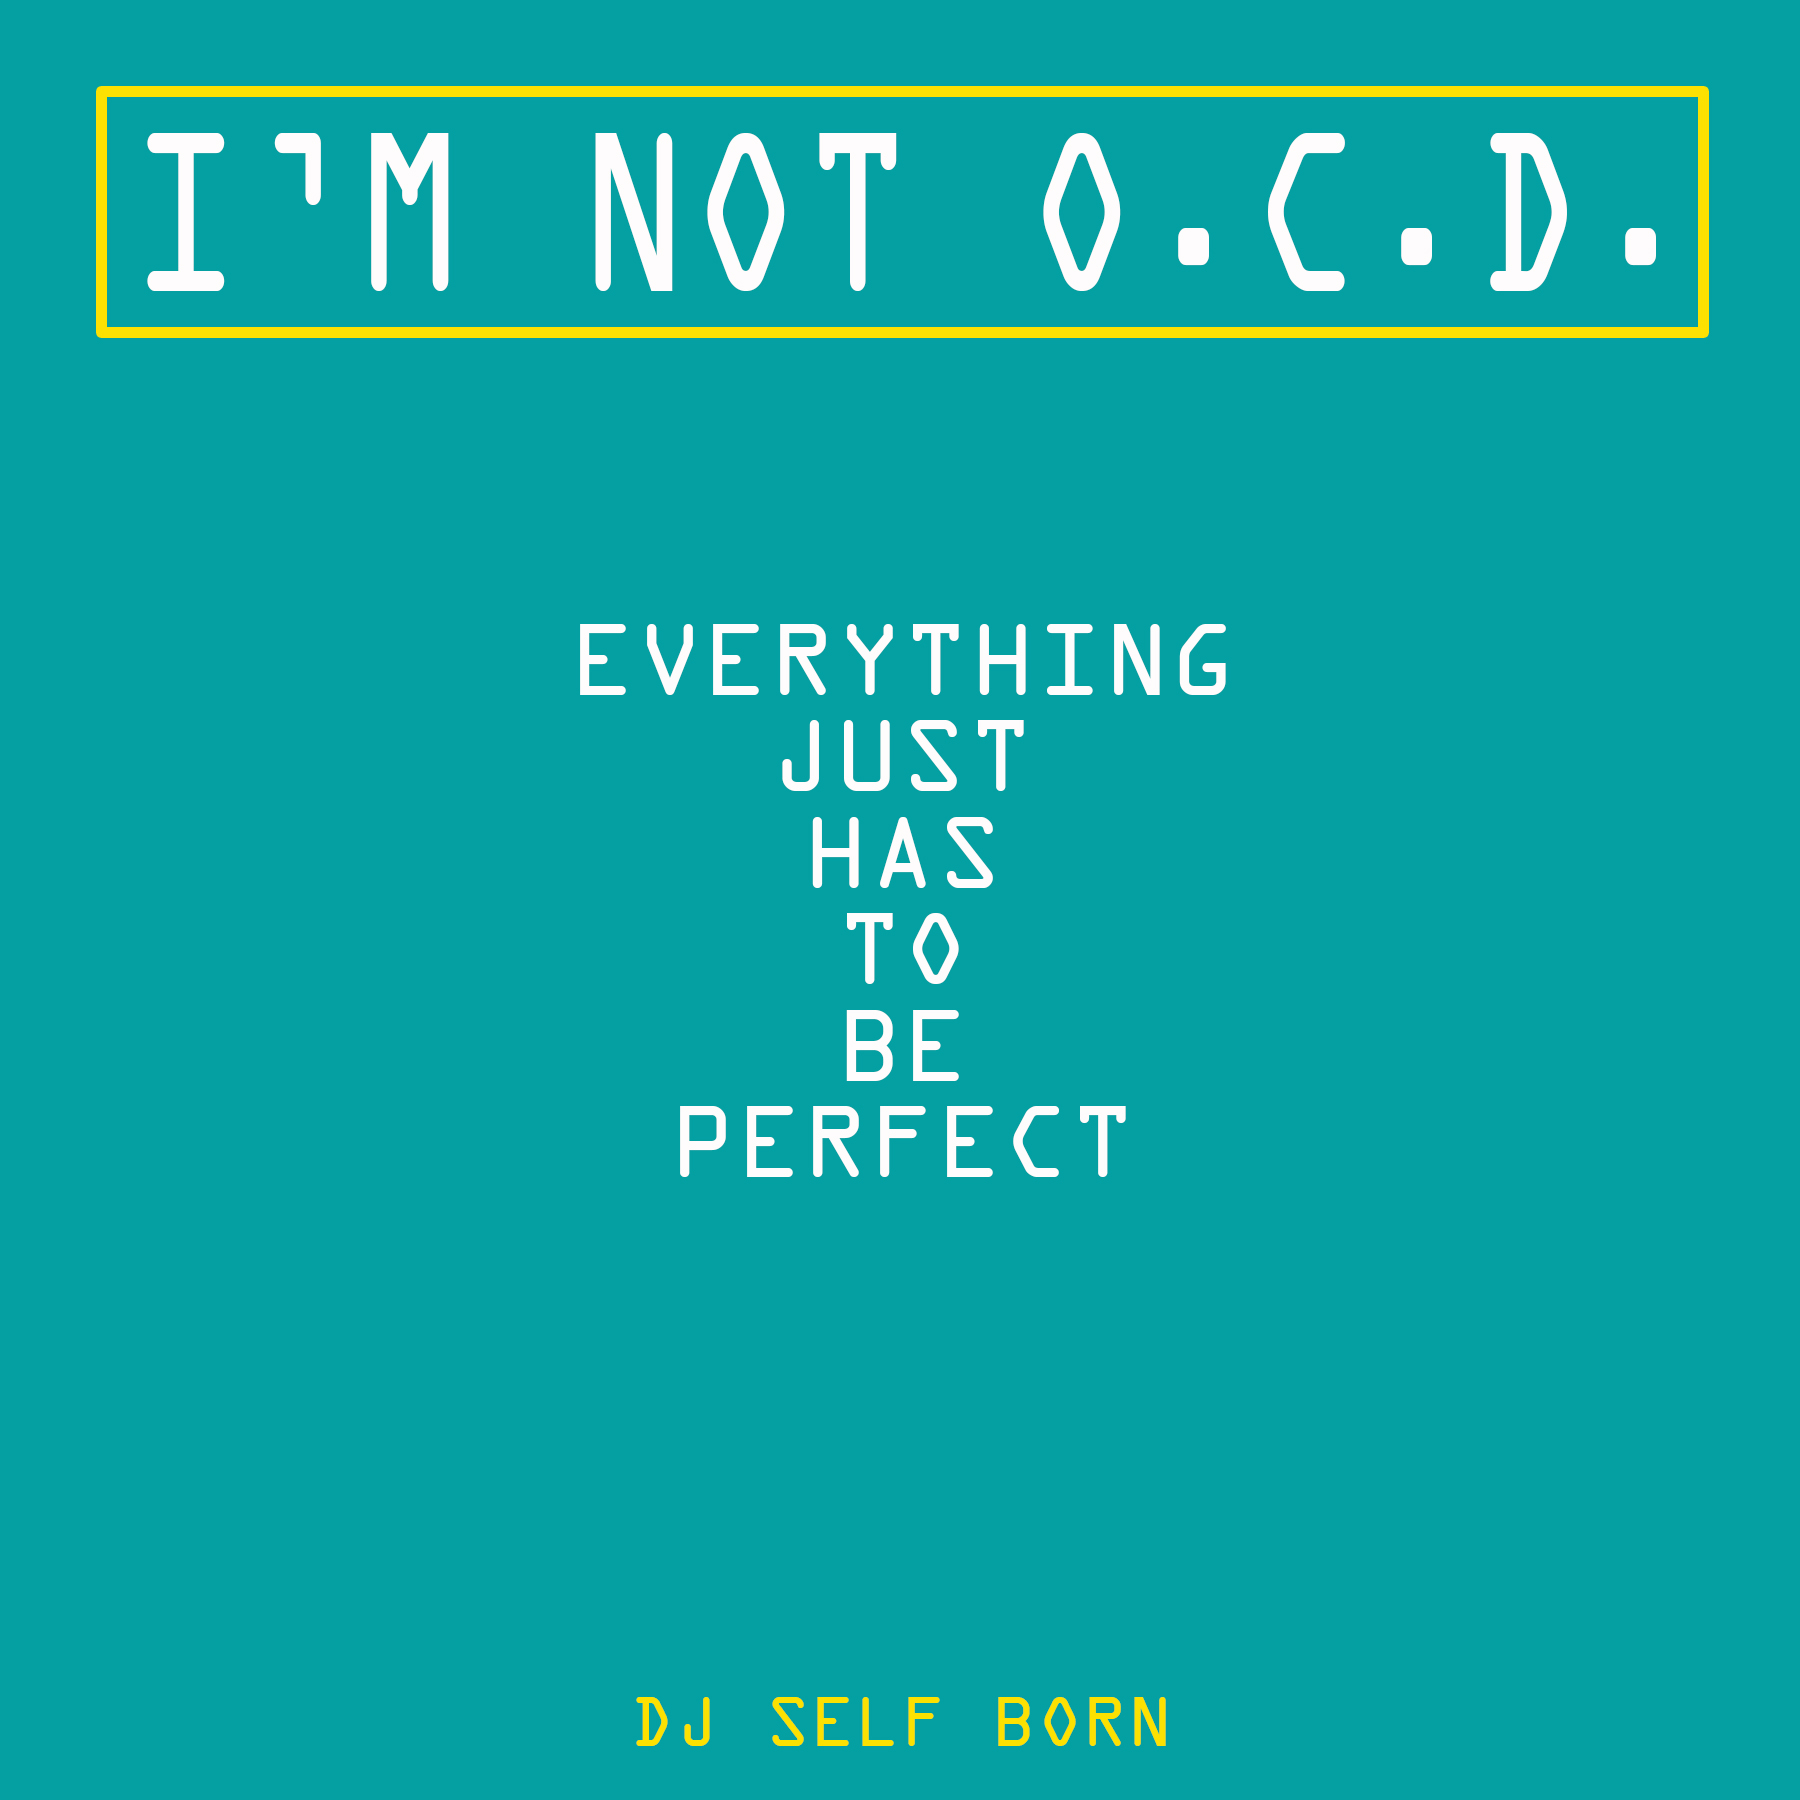 After gaining a large following of fans, ‘DJ Self Born’ continues to rise with new release “I’m Not O.C.D., Everything Just Has To Be Perfect”.